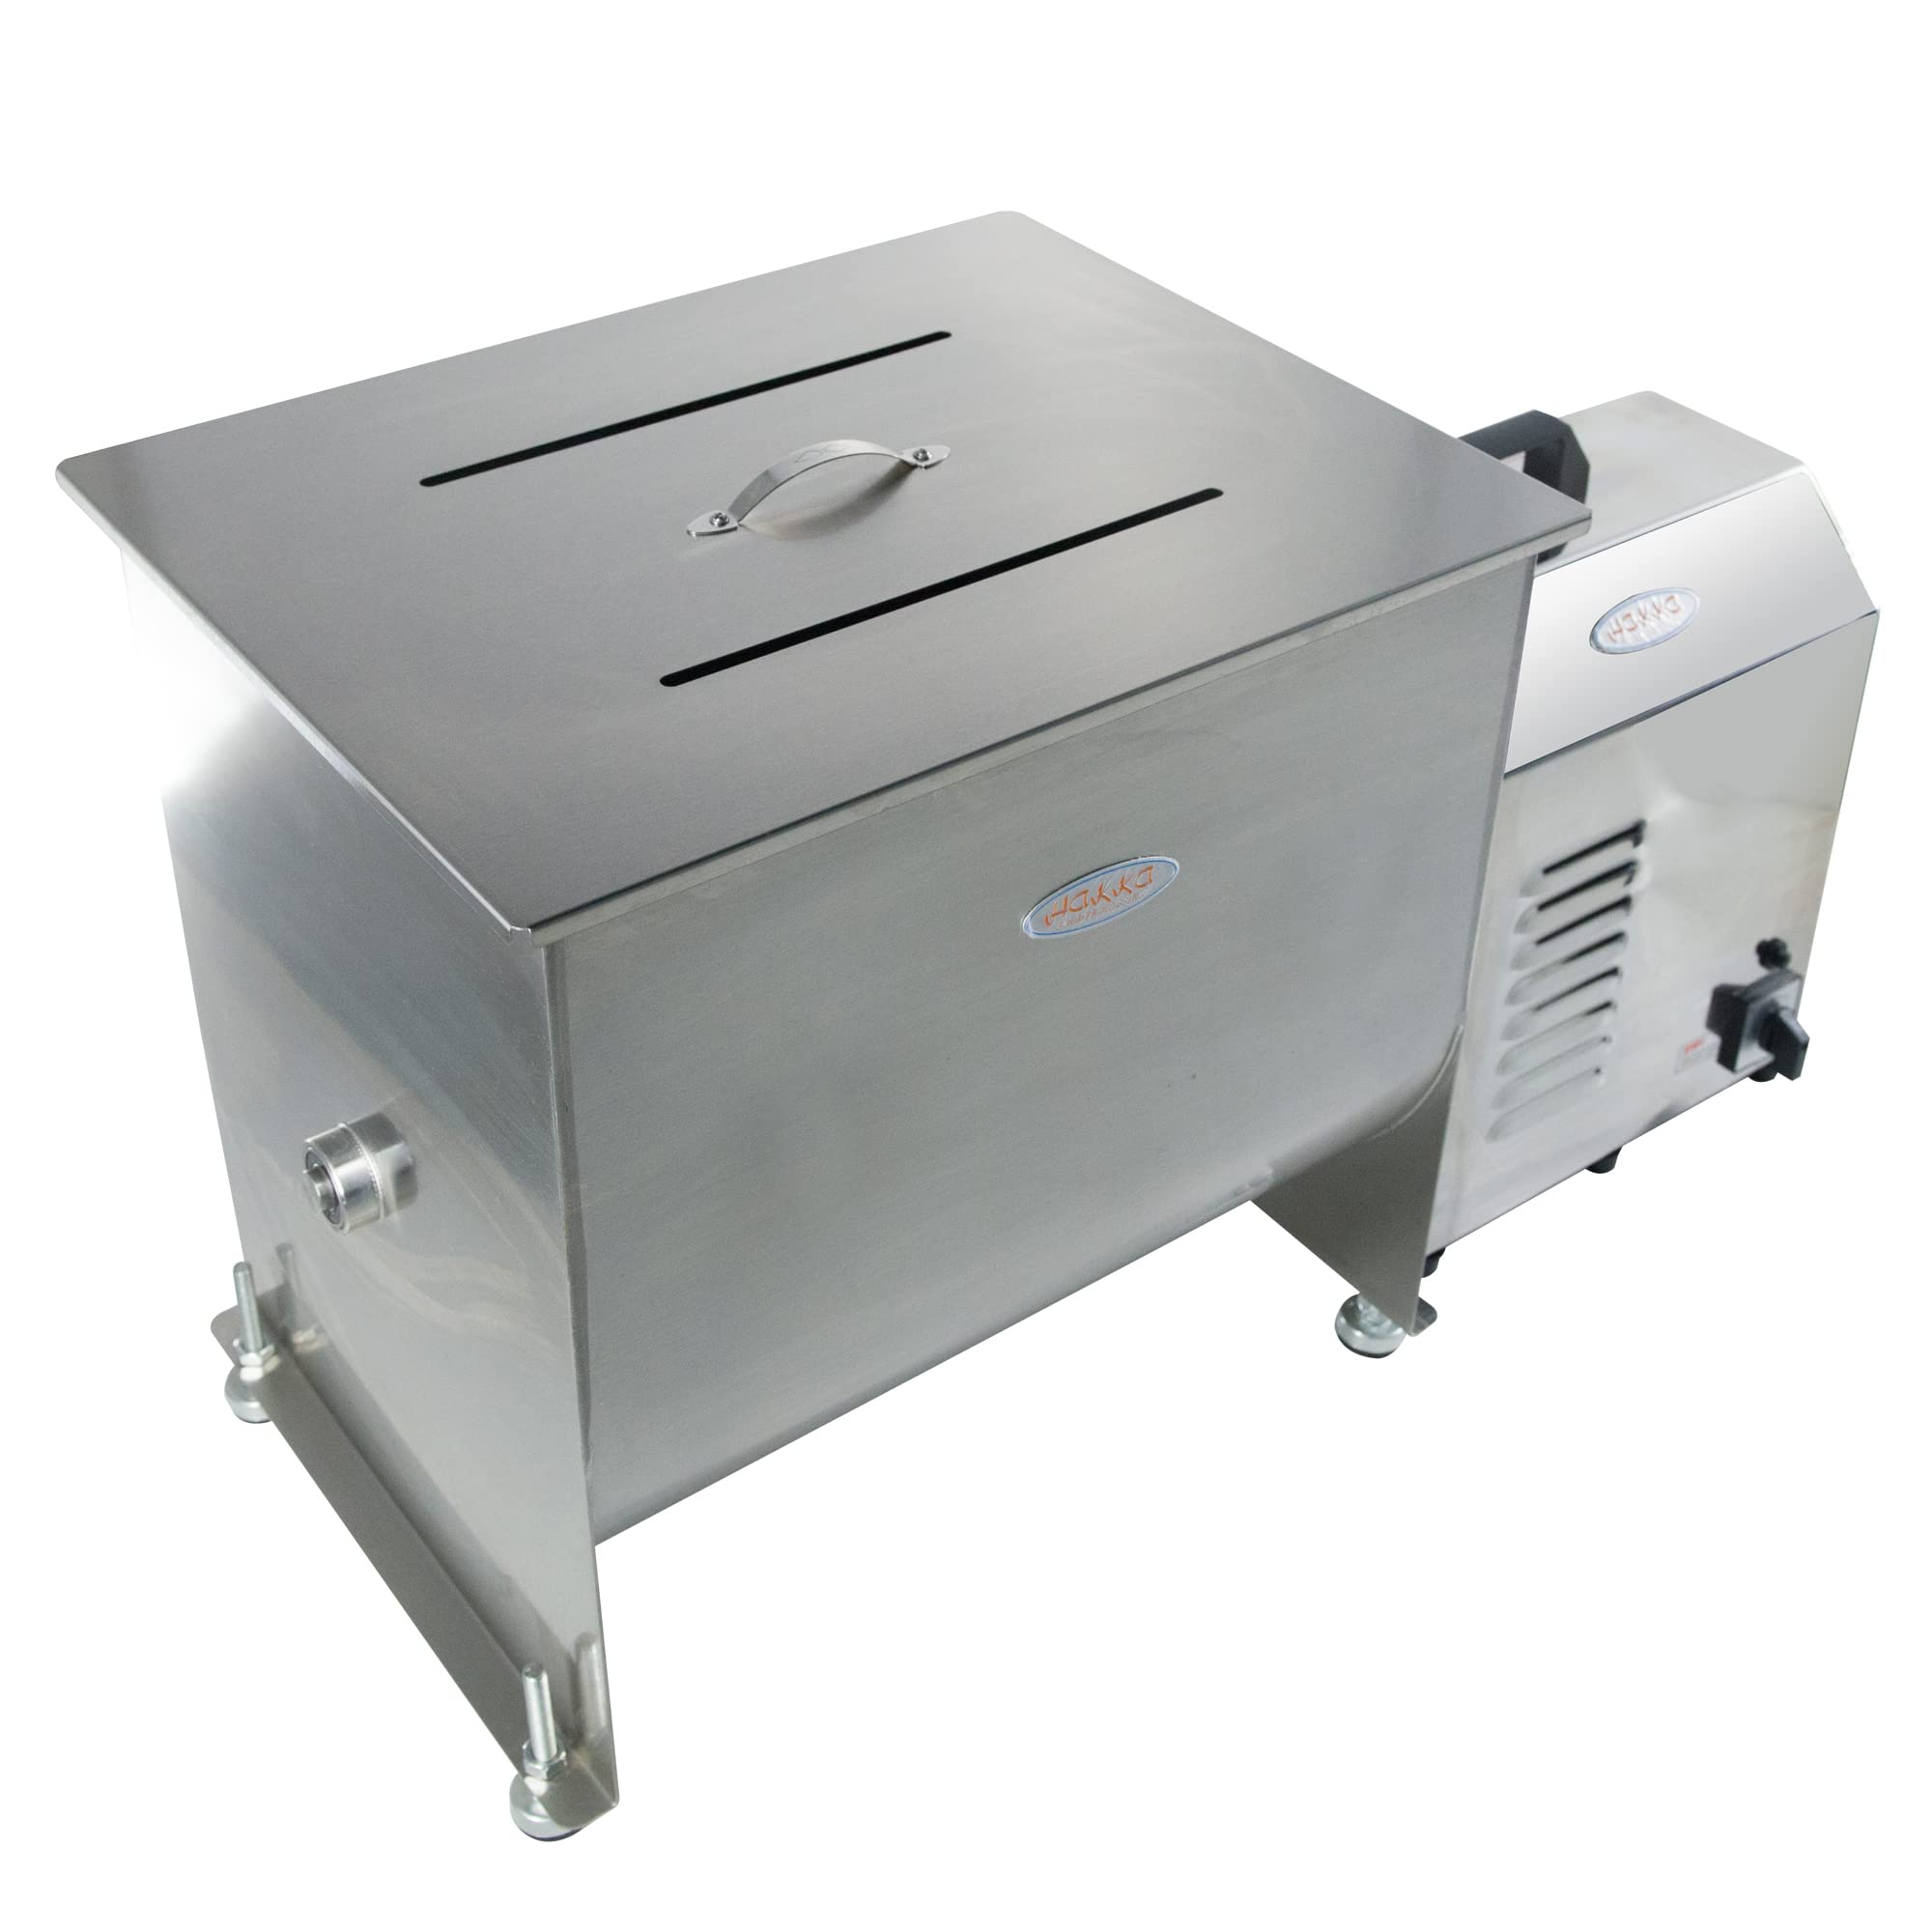 Hakka 40lb Stainless Steel Electric Meat Mixer - Efficient and Durable